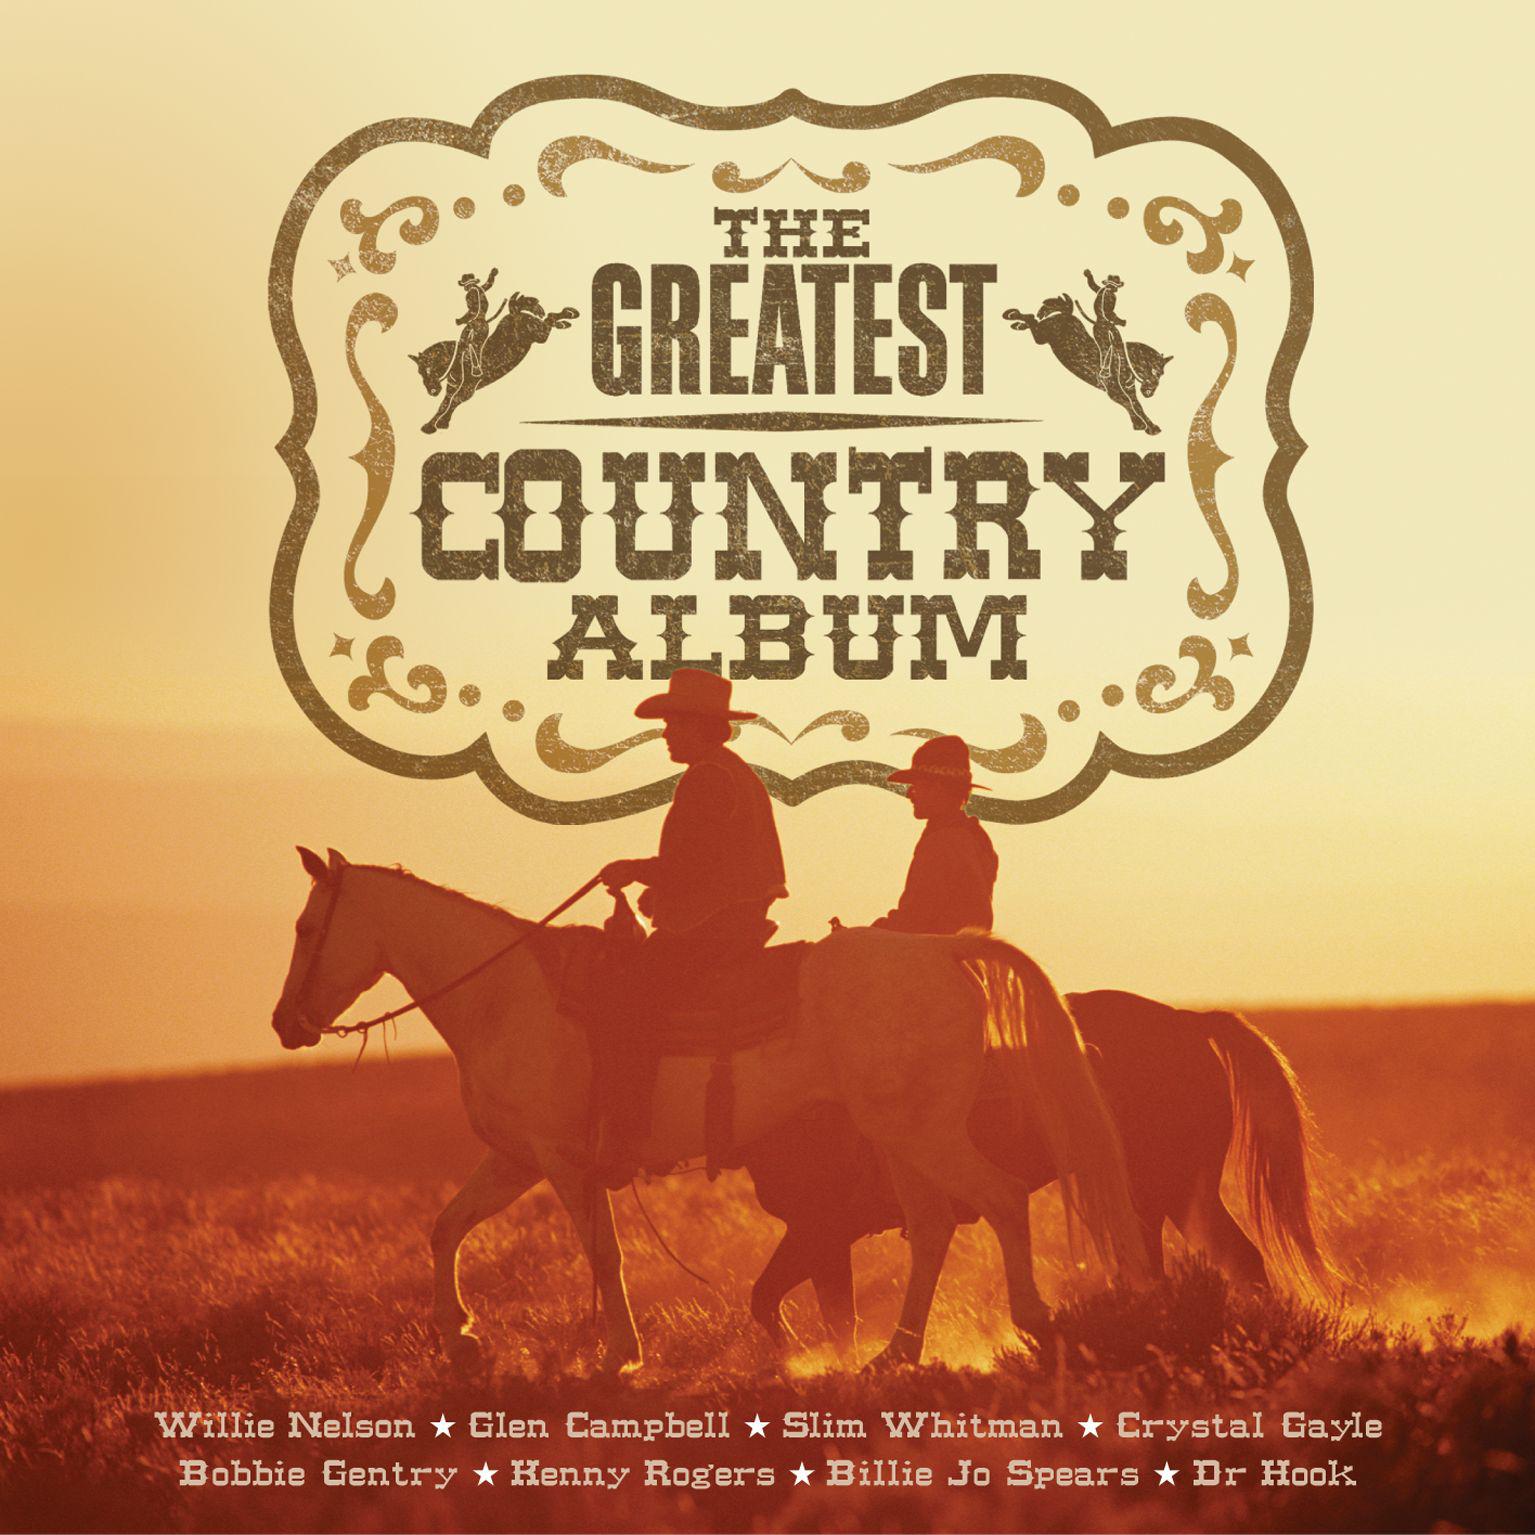 The Greatest Country Album